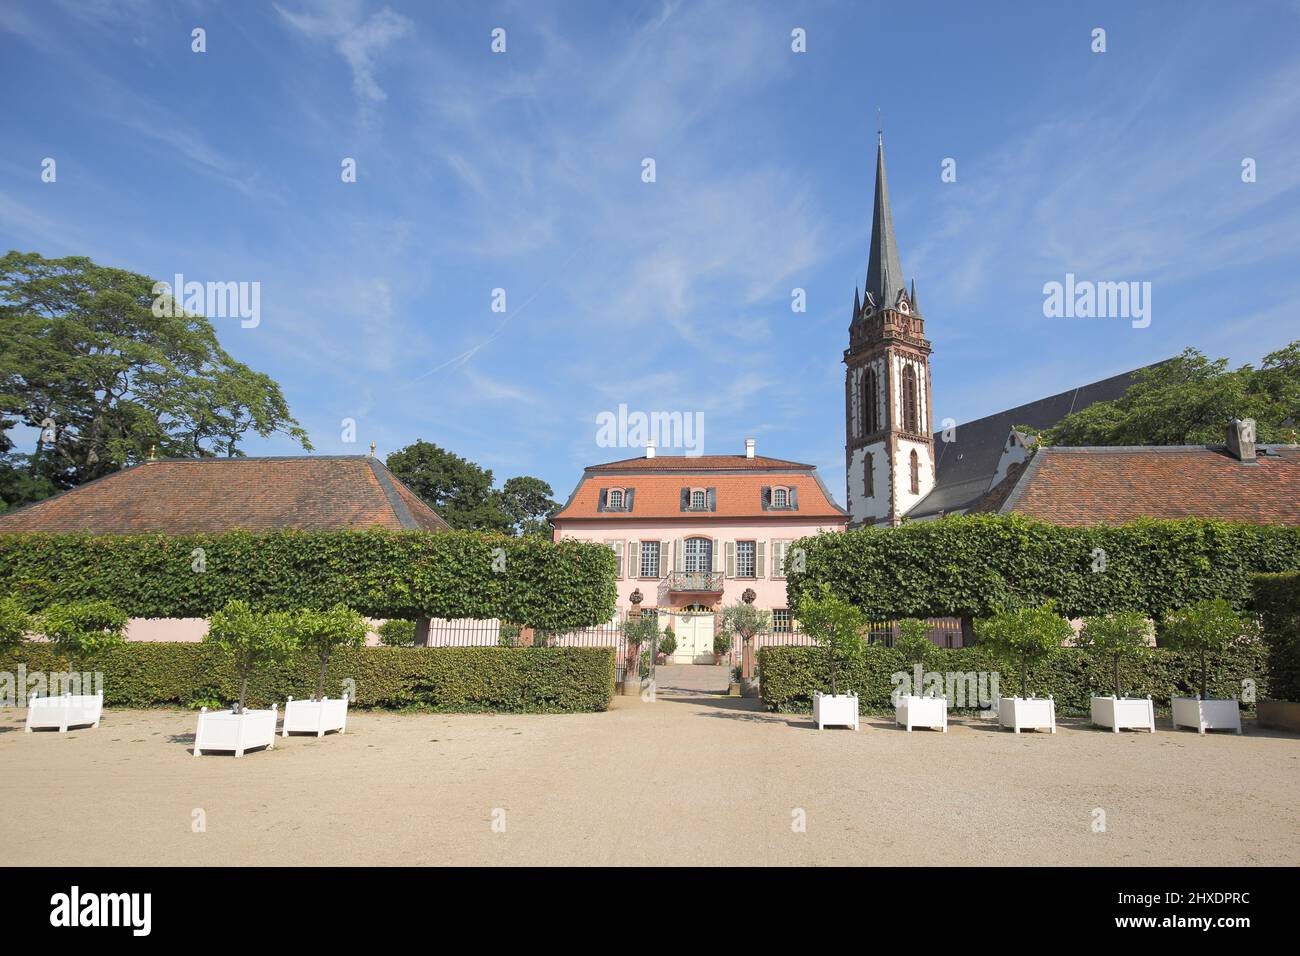 Prince George Garden with Prince George Palace and St. Elisabeth Darmstadt, Hesse, Germany Stock Photo